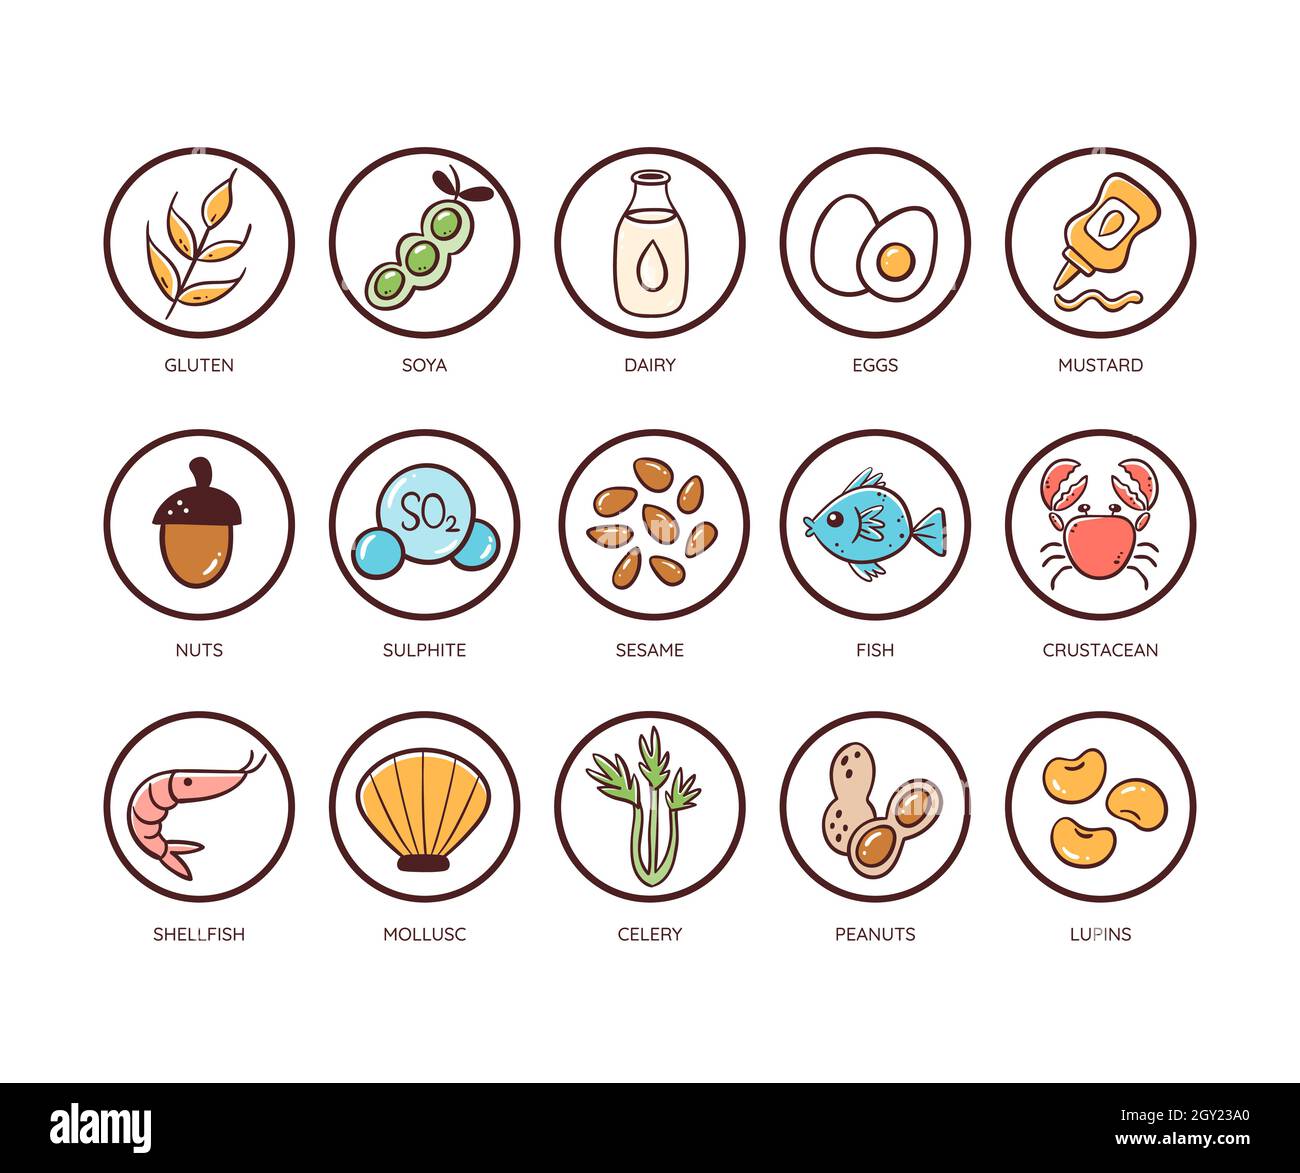 Food allergen icon set. Icons of the main ingredients that must be declared as allergens. Very useful for restaurant menus and meals. Colorful vector Stock Vector